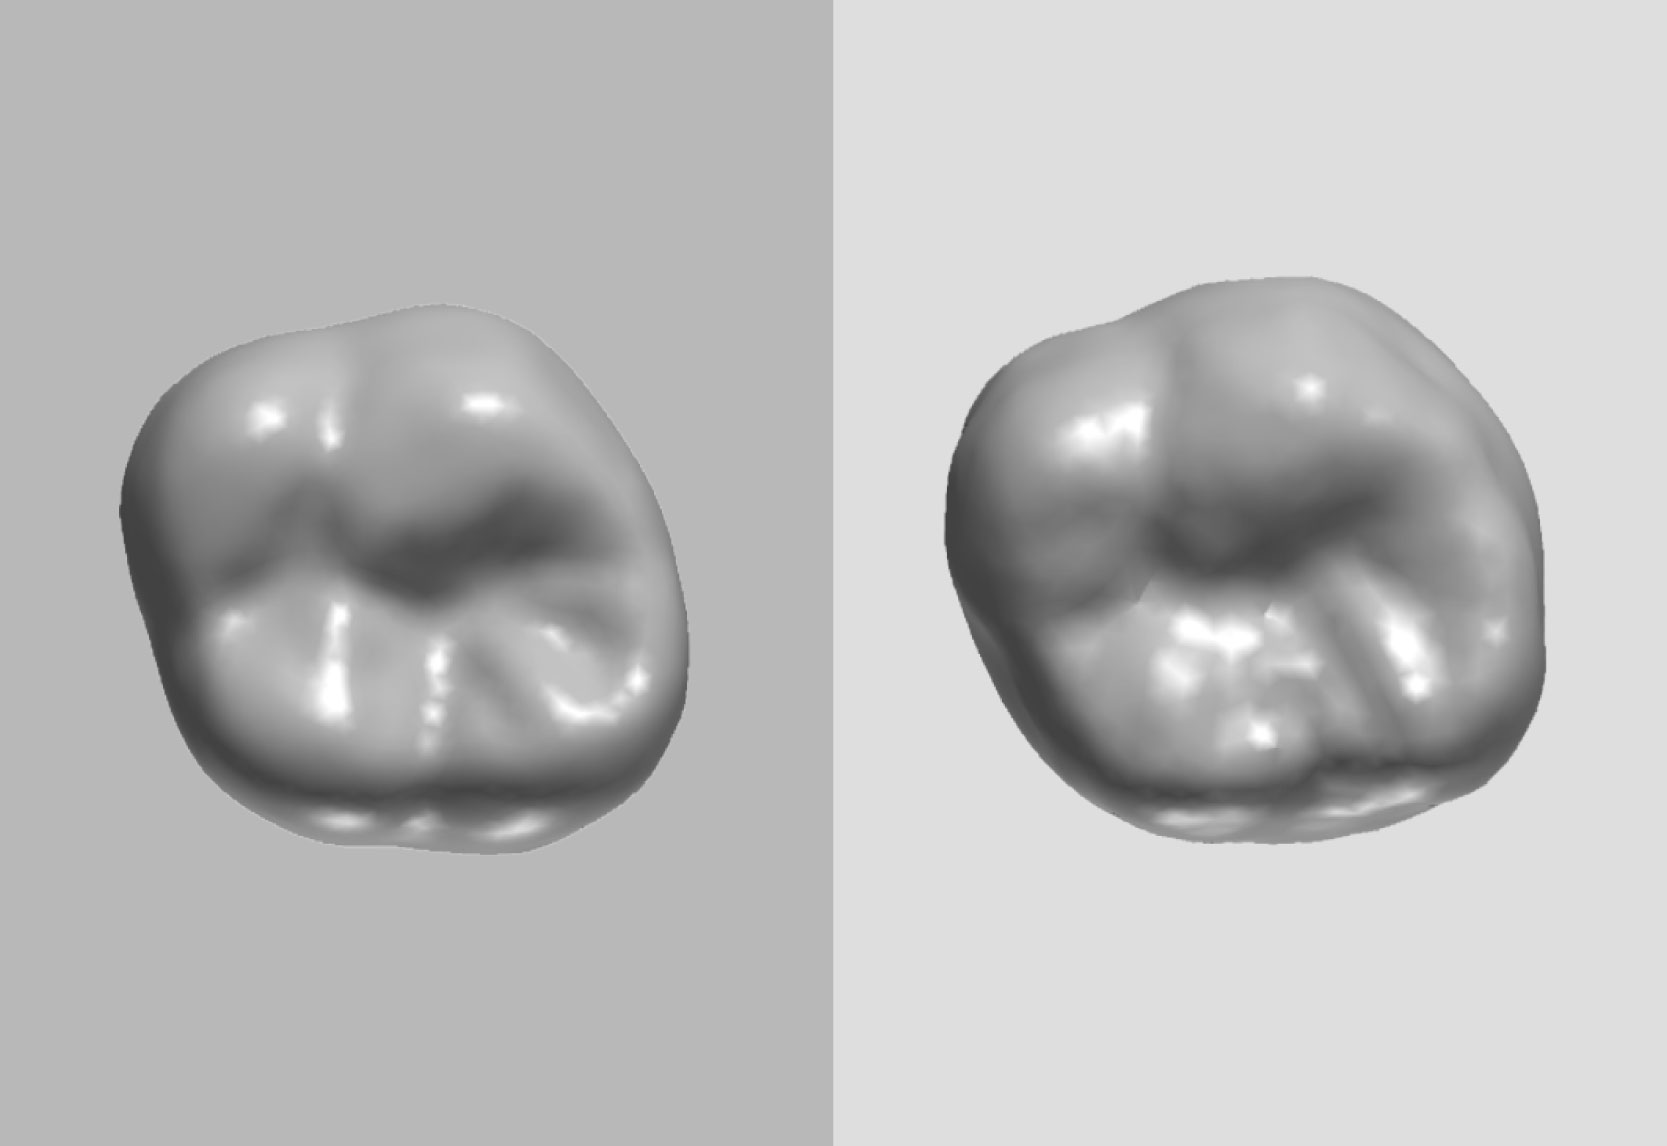 Natural tooth (left) compared with tooth tailored by generative AI (right)